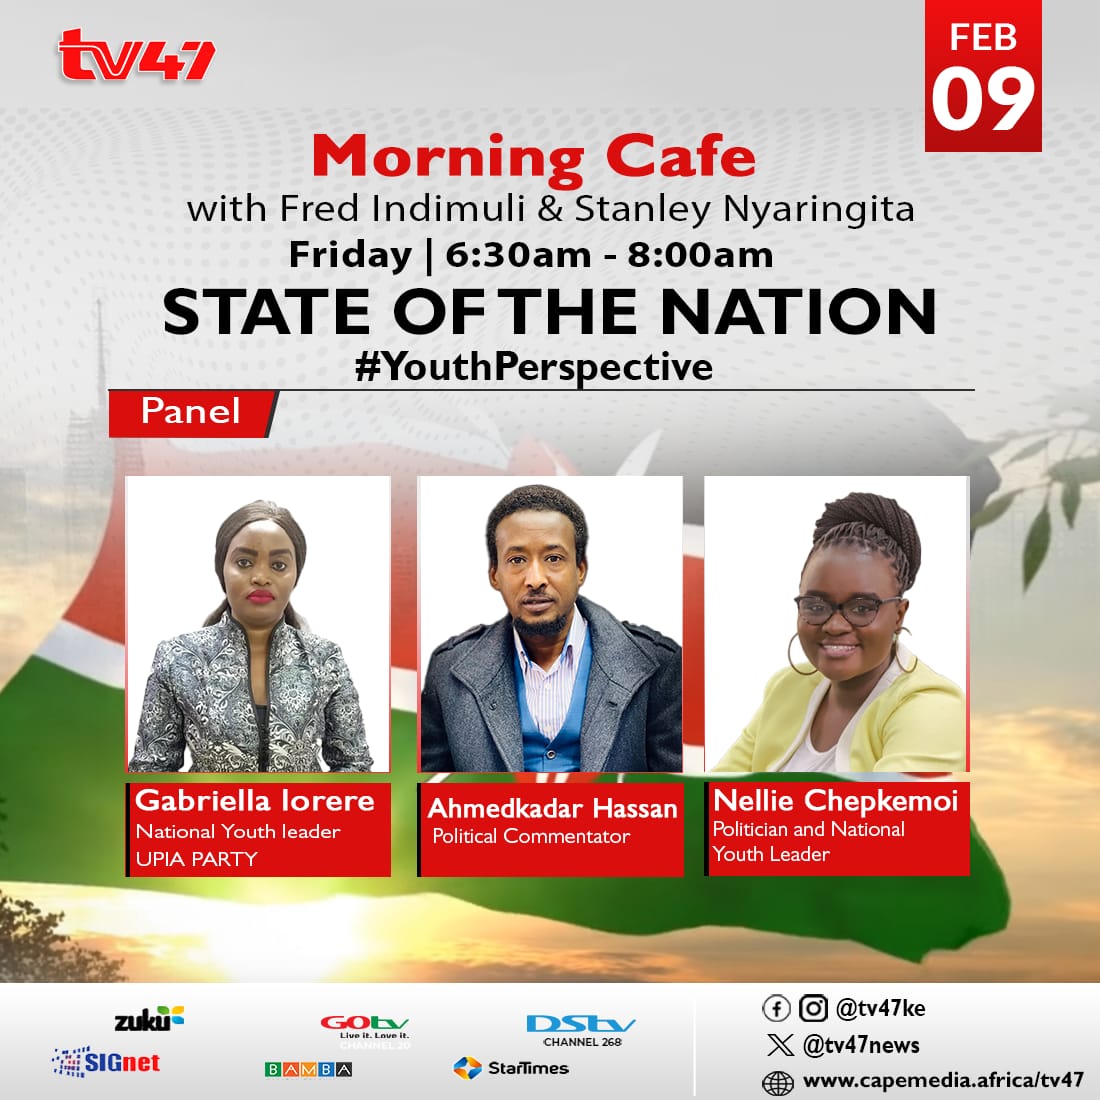 Don't miss to catch the 'State of the Nation' discussion on #YouthPerspective from 6:30am with @Fredindimuli and @Nyaringita_ on #MorningCafe 🔥🔥